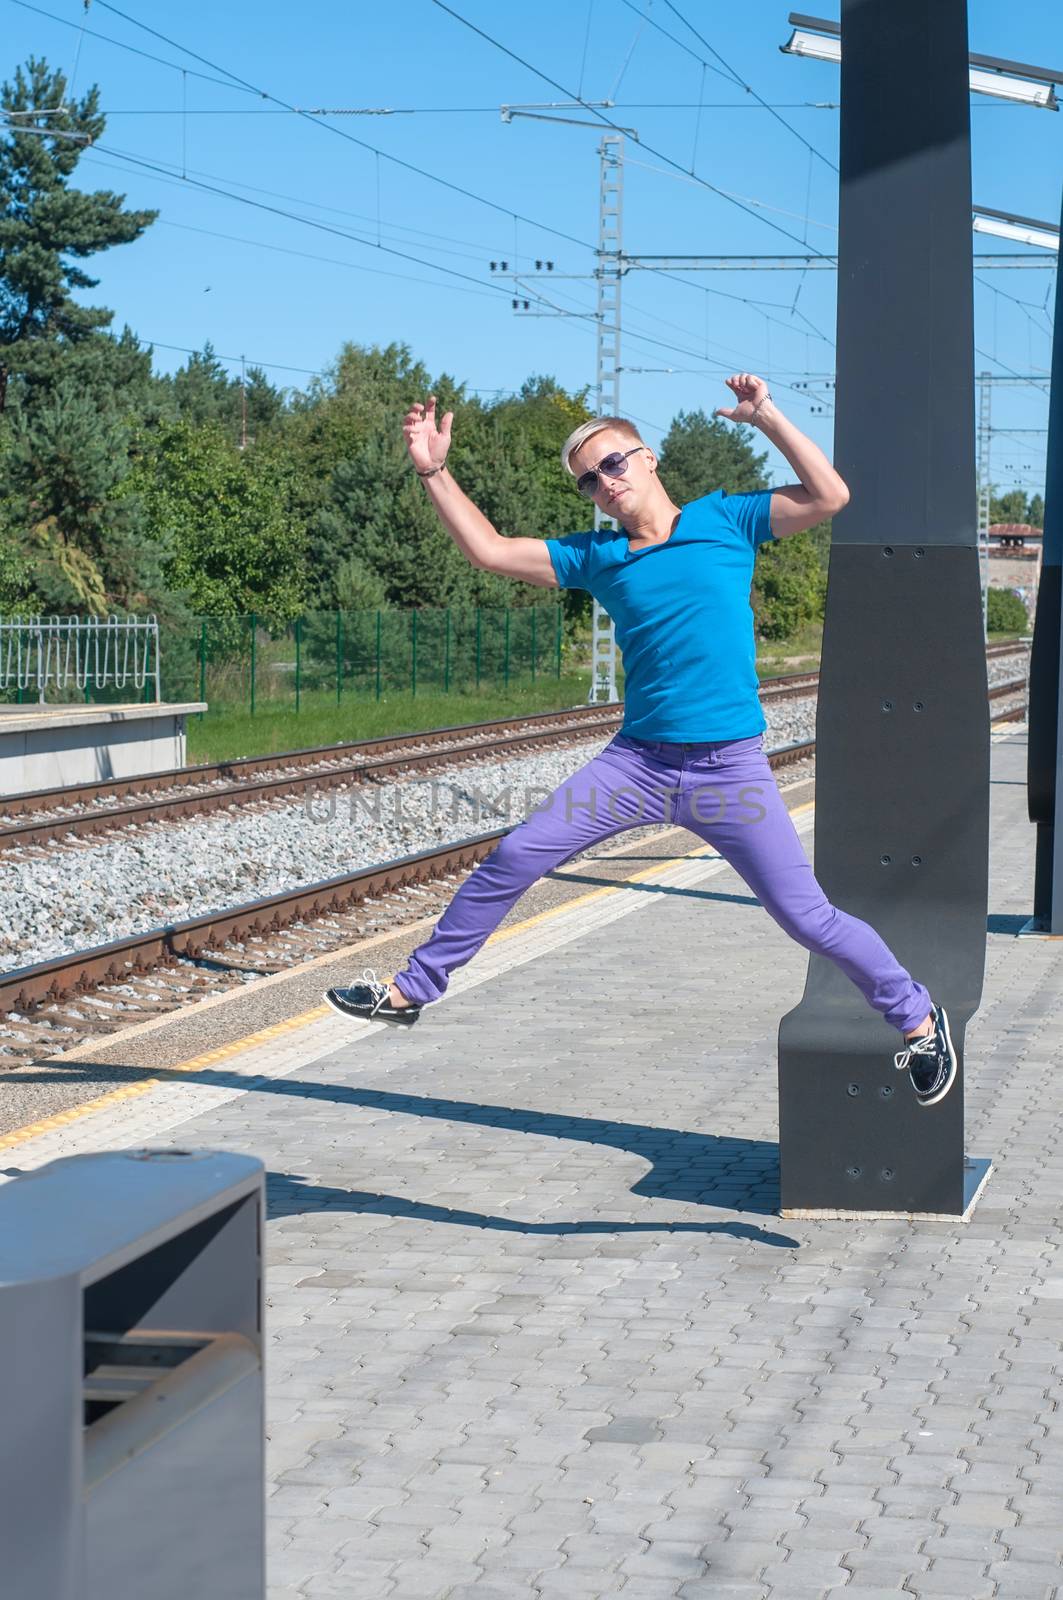 Handsome young guy jumping near rail track